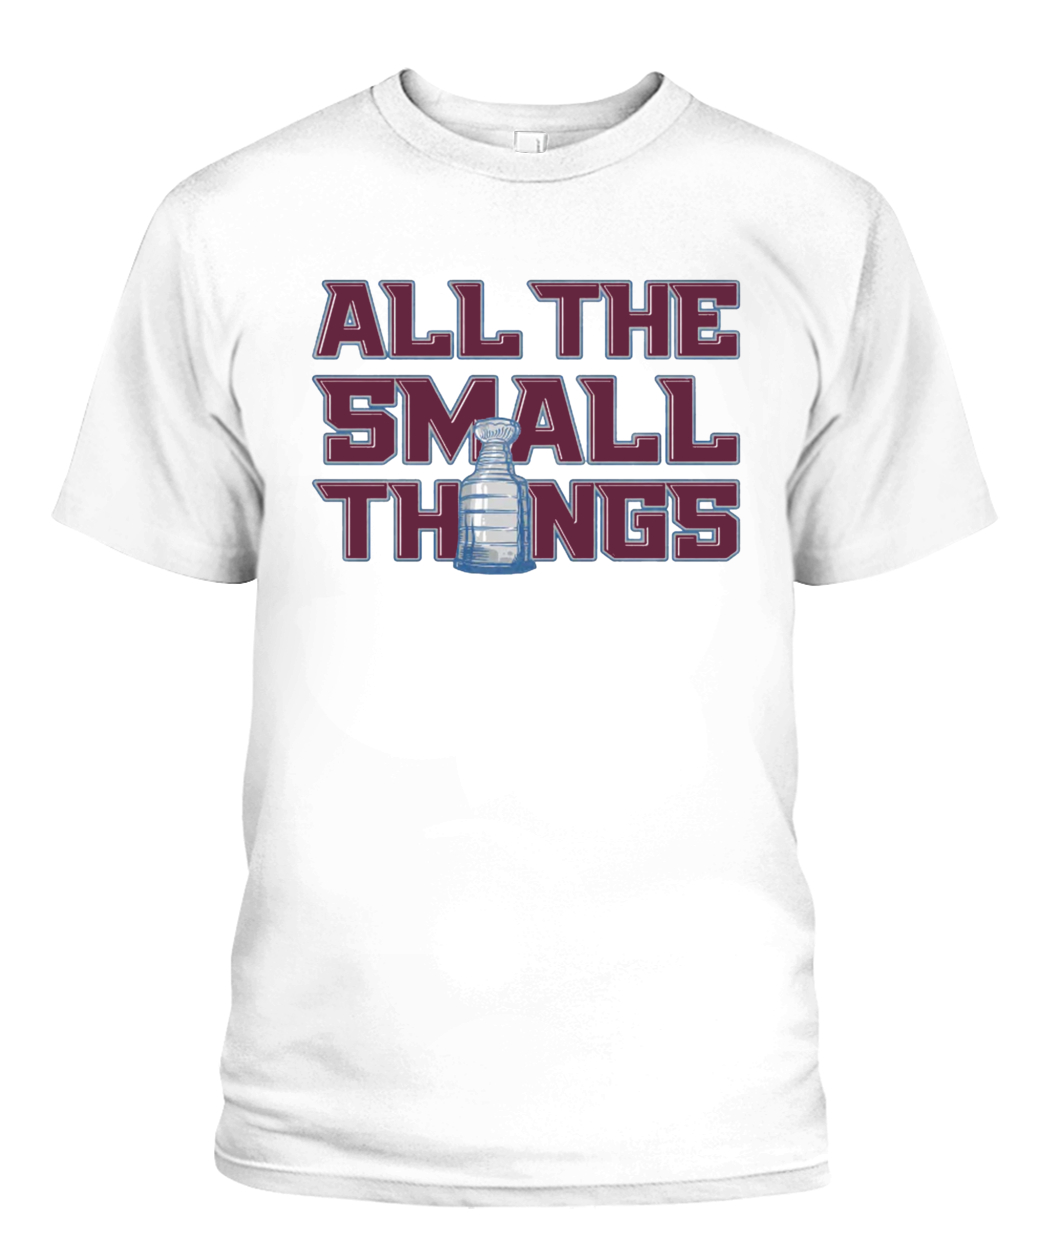 Colorado Avalanche 2022 Stanley Cup Champions Found A Way shirt